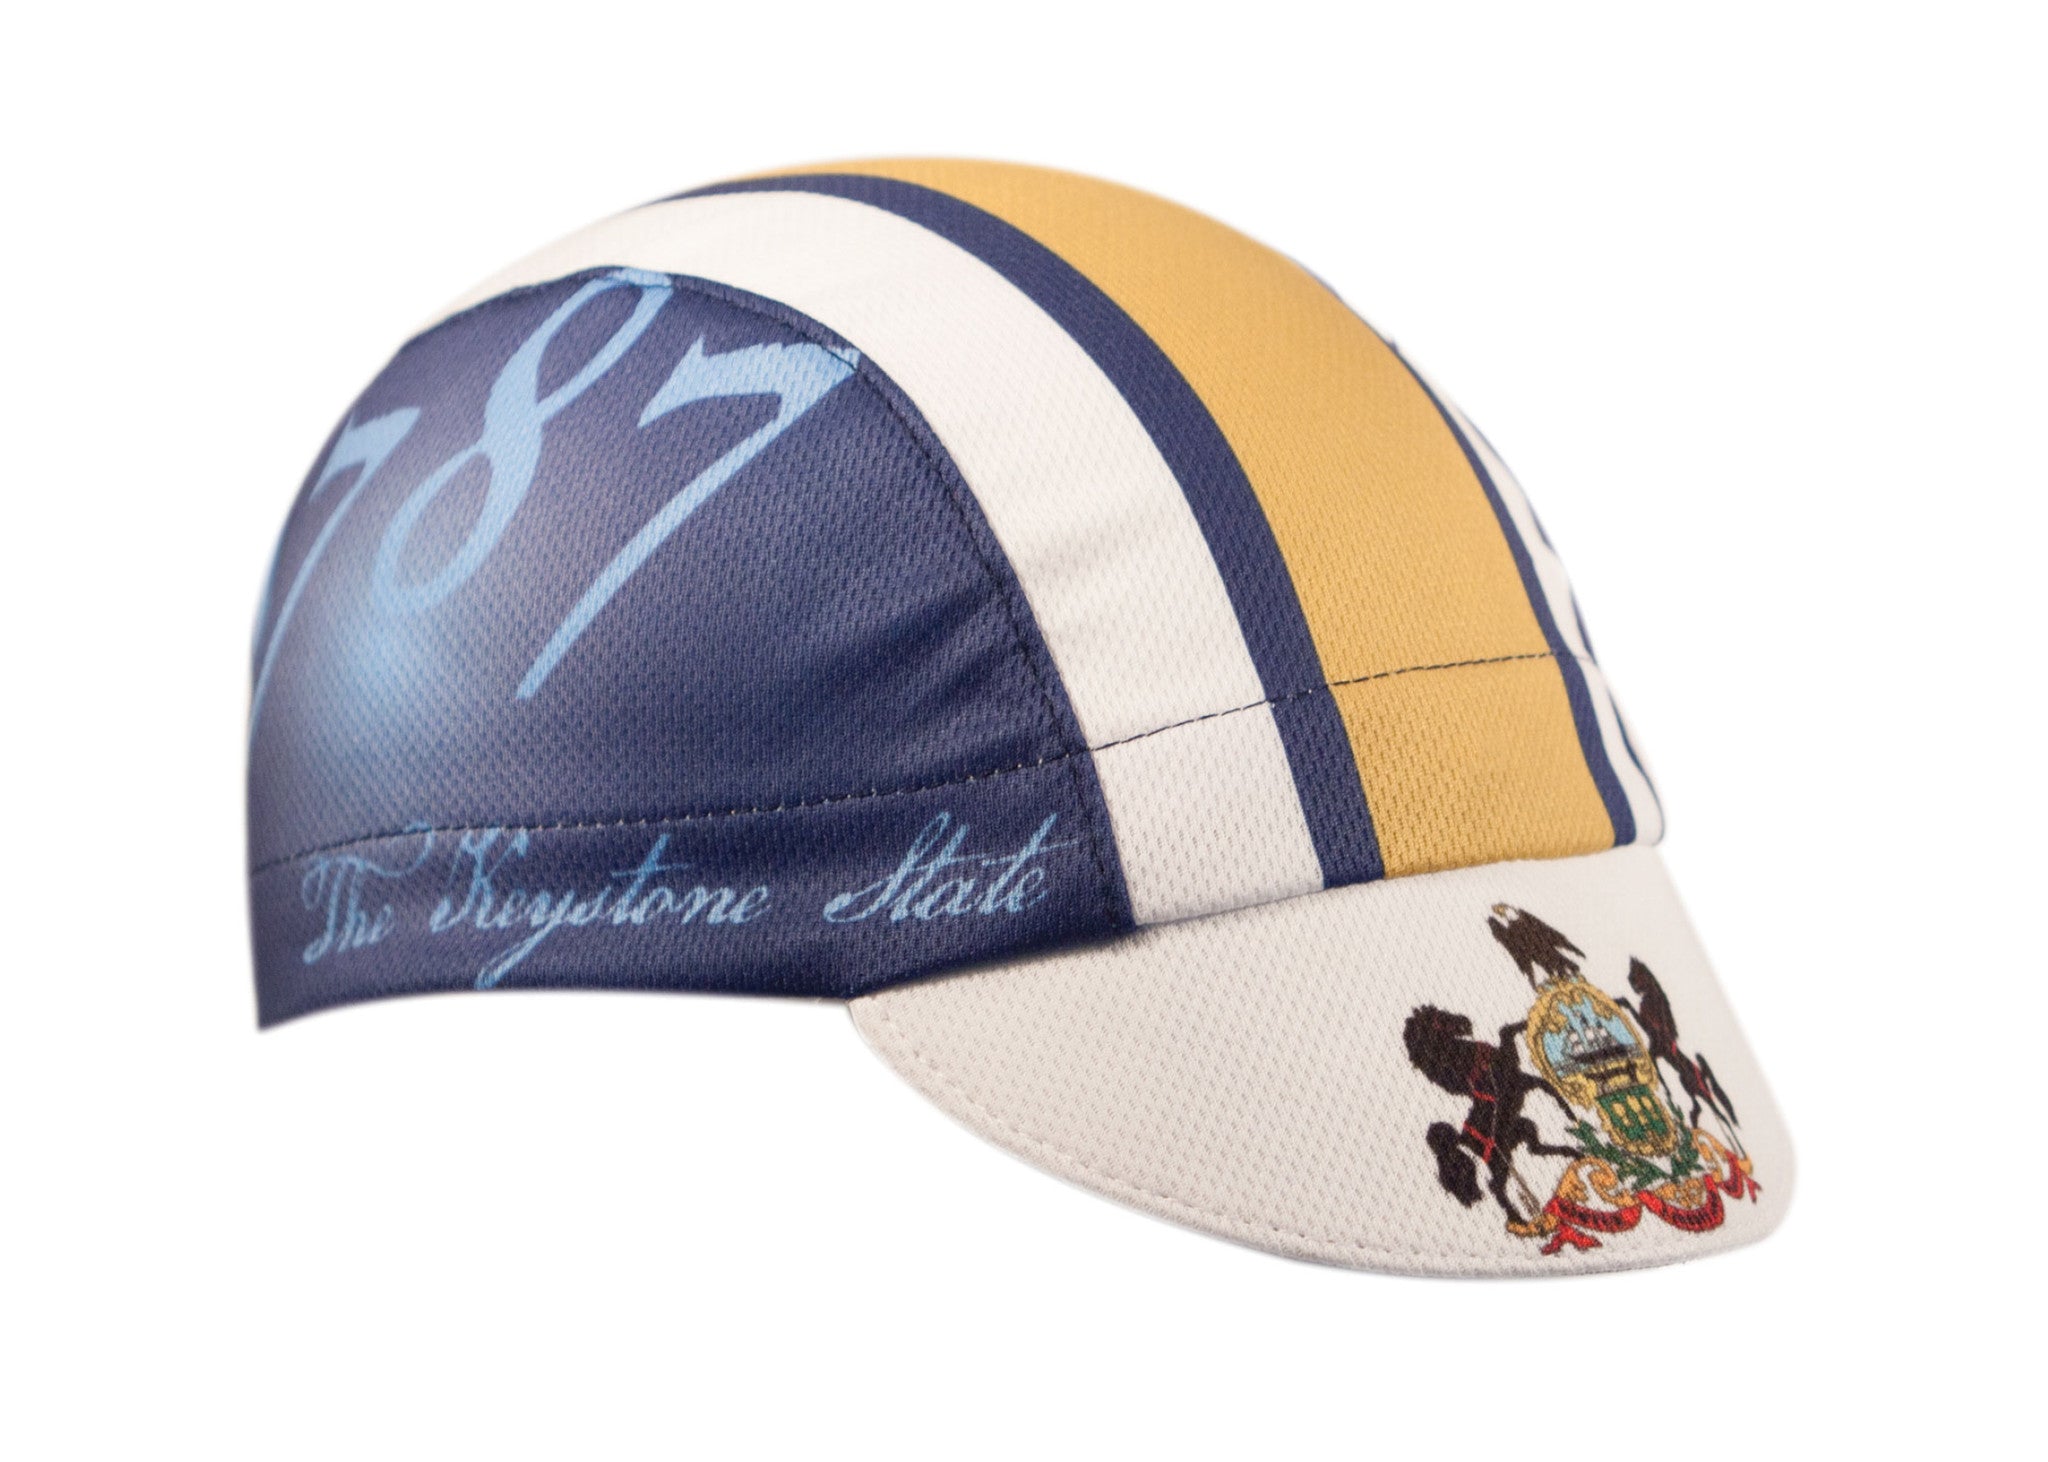 Pennsylvania Technical 3-Panel Cycling Cap.  Blue, white, and yellow cap with 1787 and The Keystone State text on side.  Pennsylvania coat of arms on bill.  Angled view.